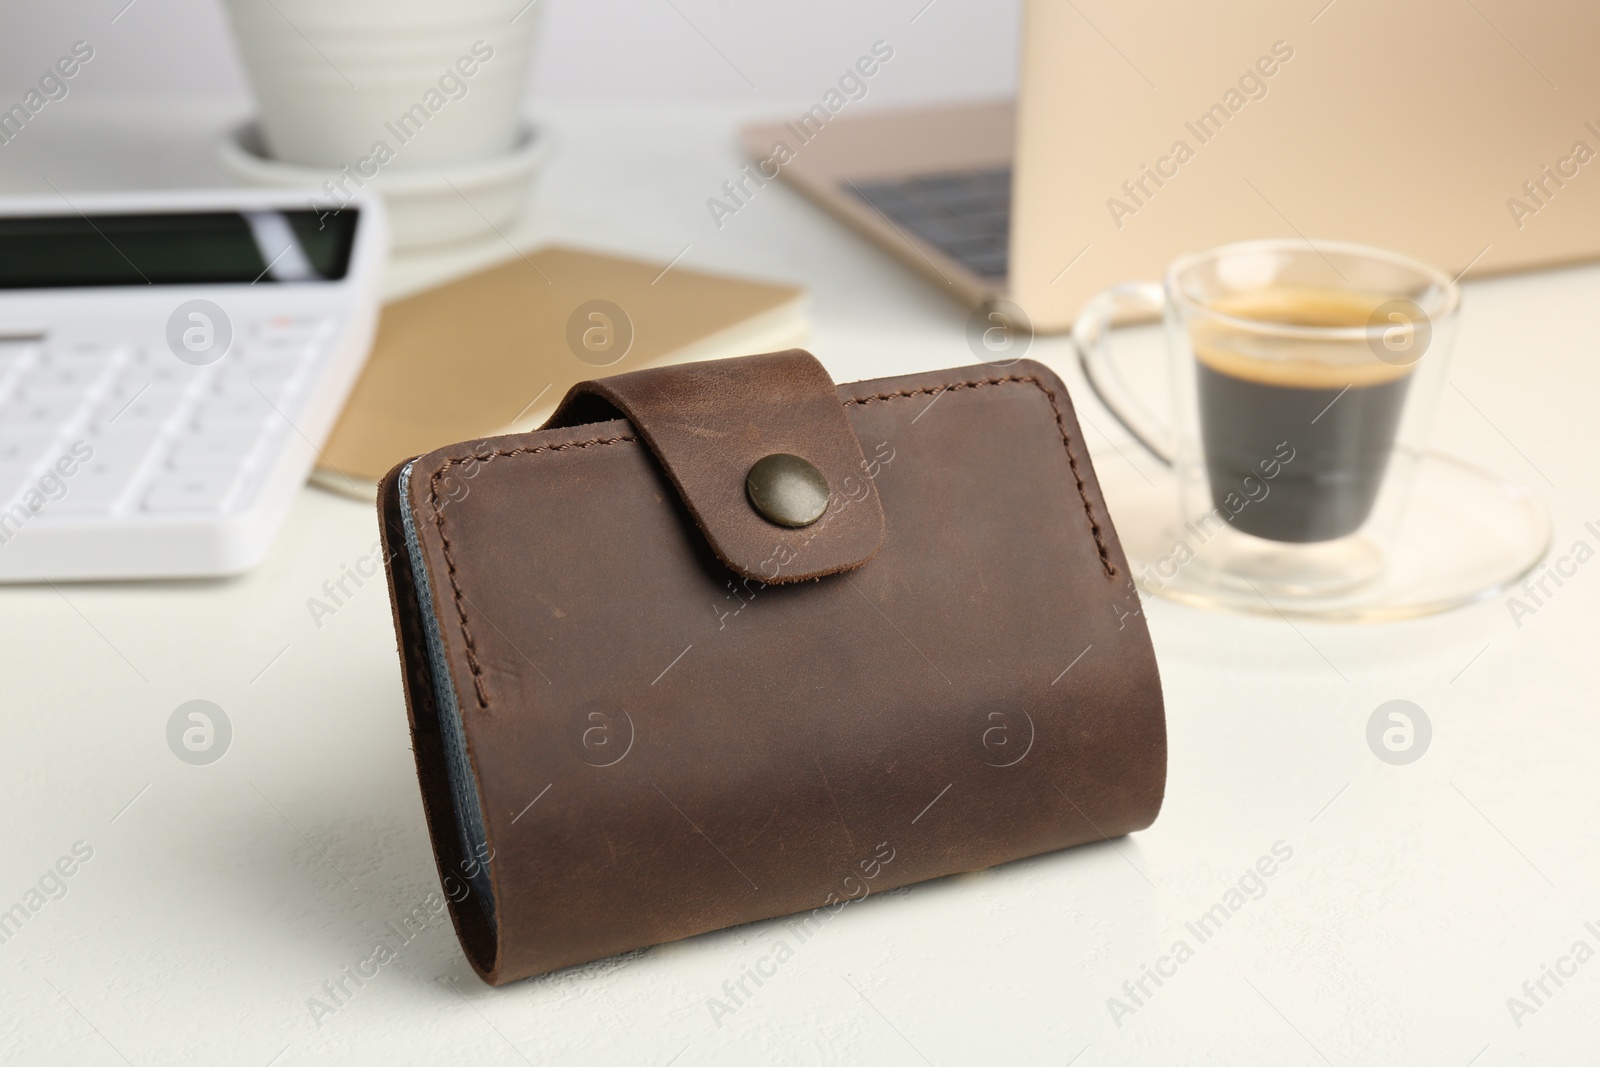 Photo of Leather card holder, calculator and coffee on white table